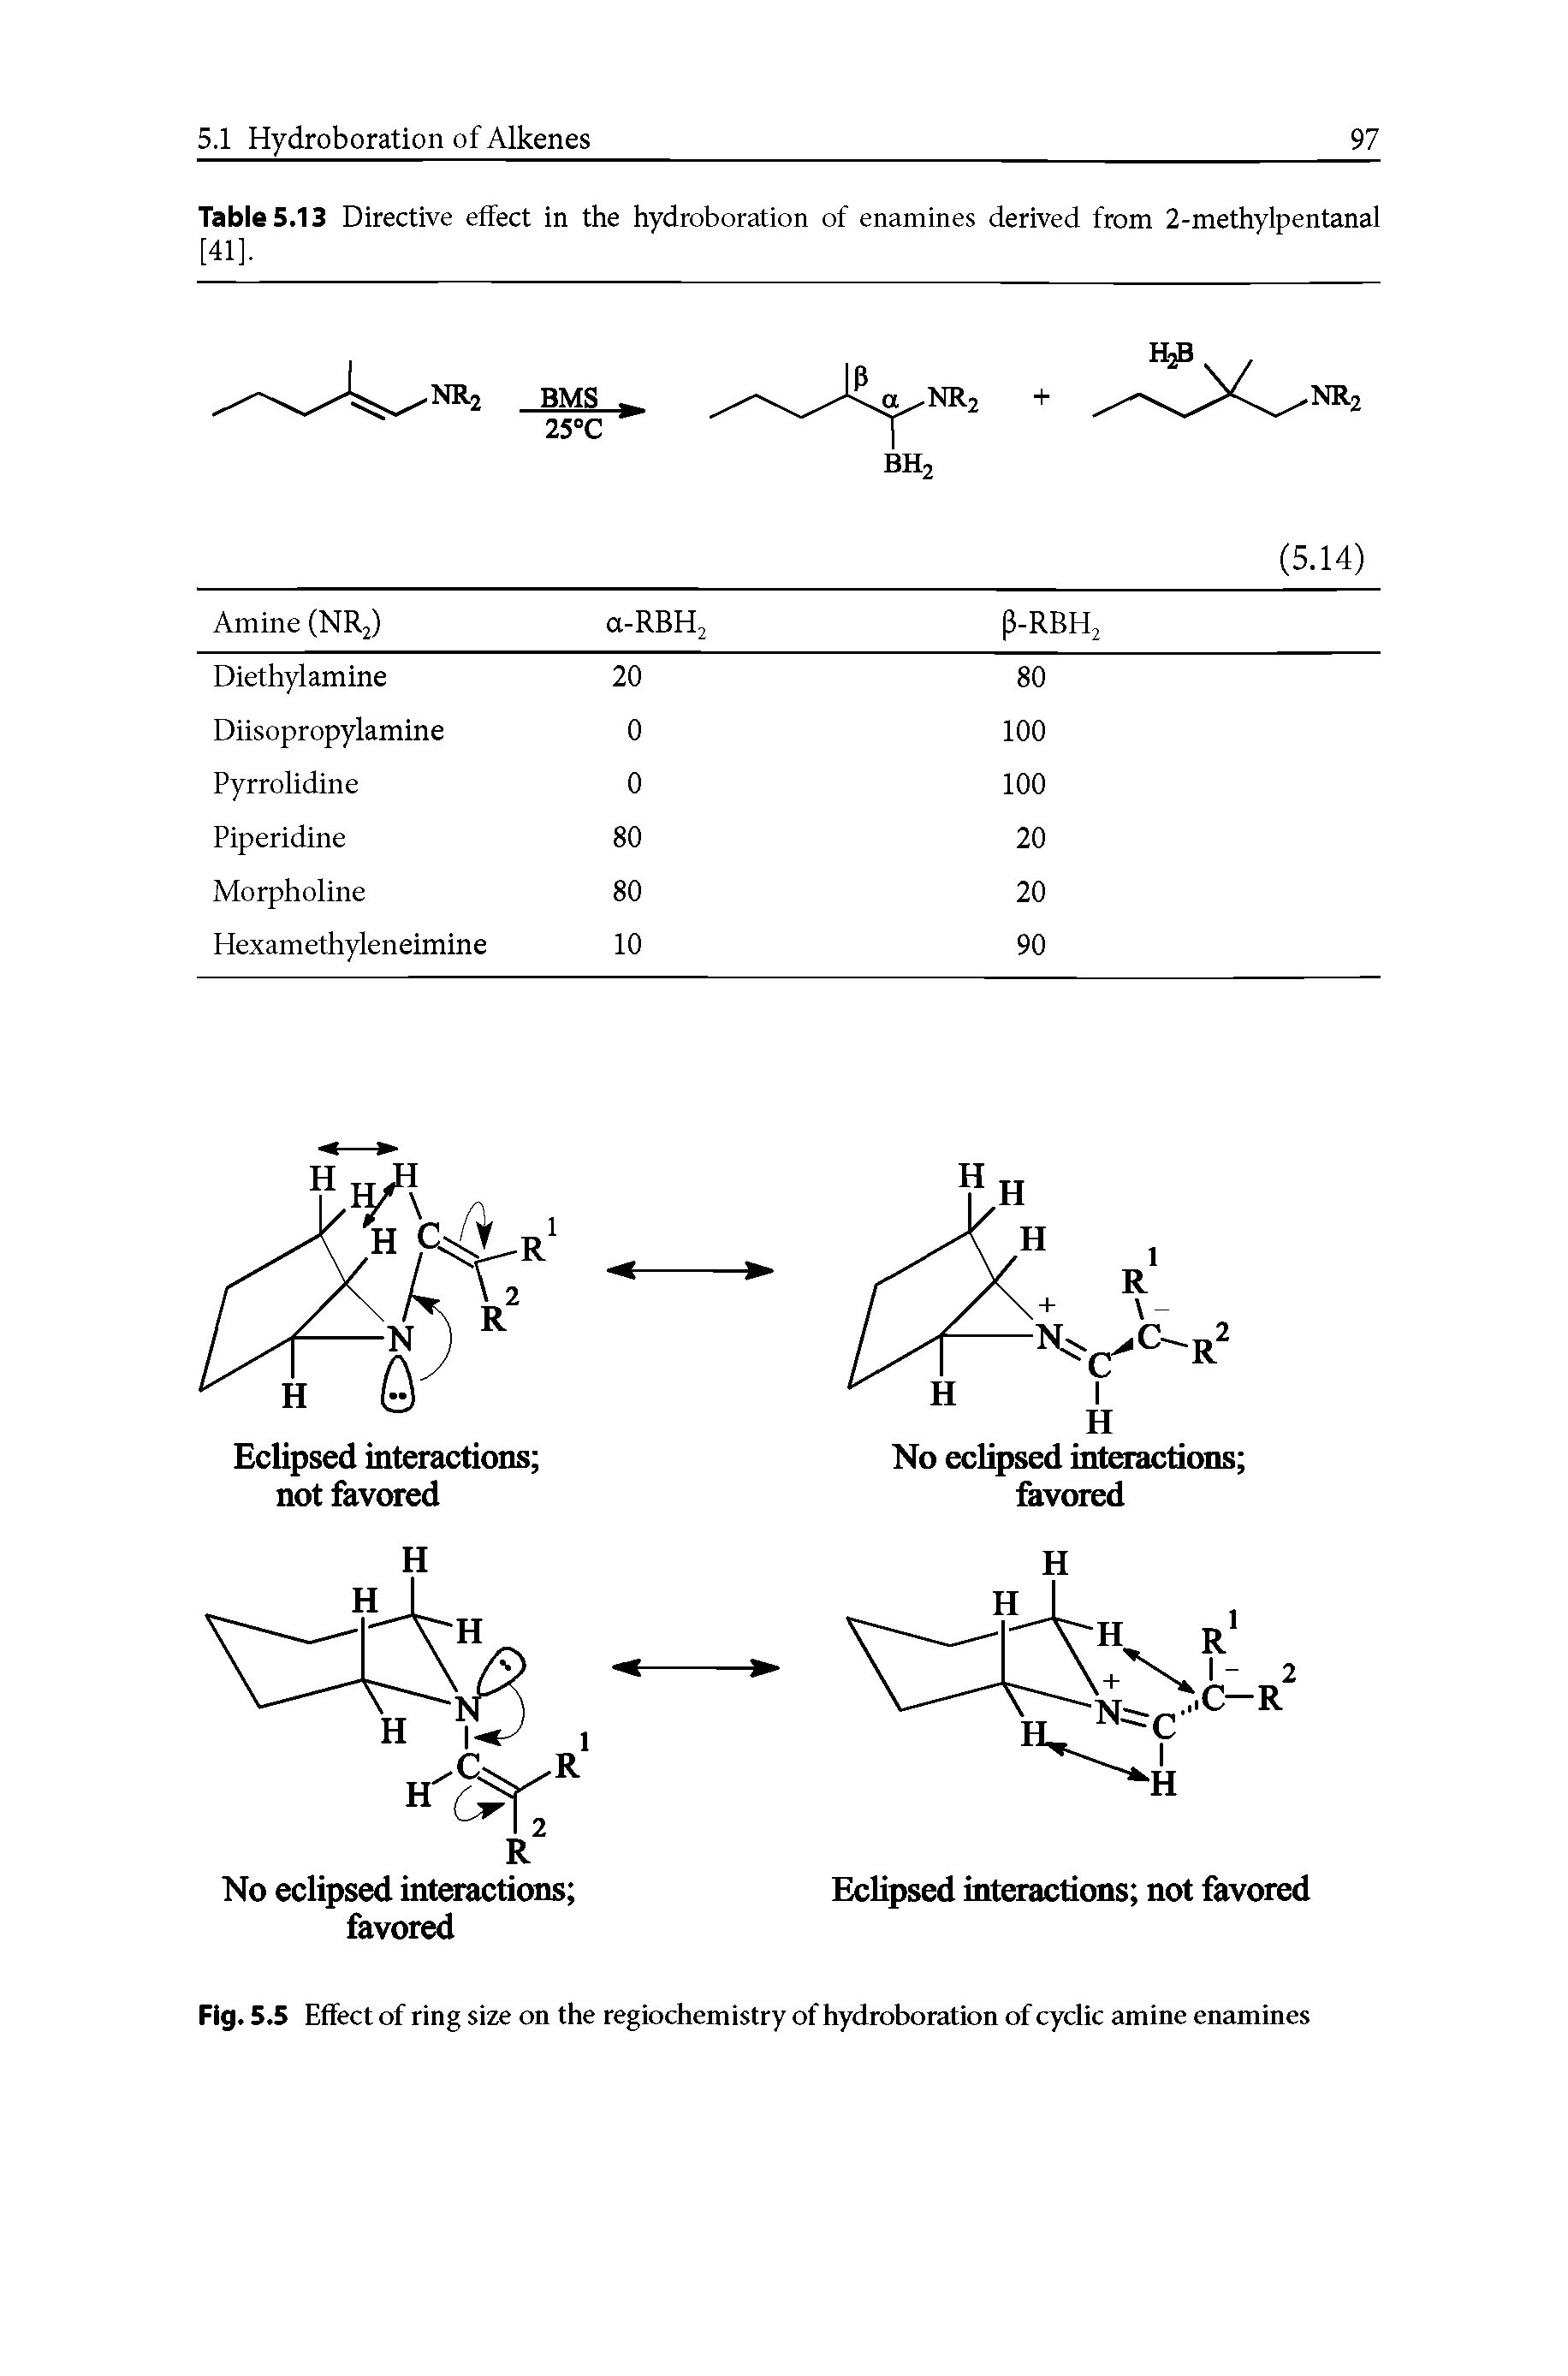 Table 5.13 Directive effect in the hydroboration of enamines derived from 2-methylpentanal [41].